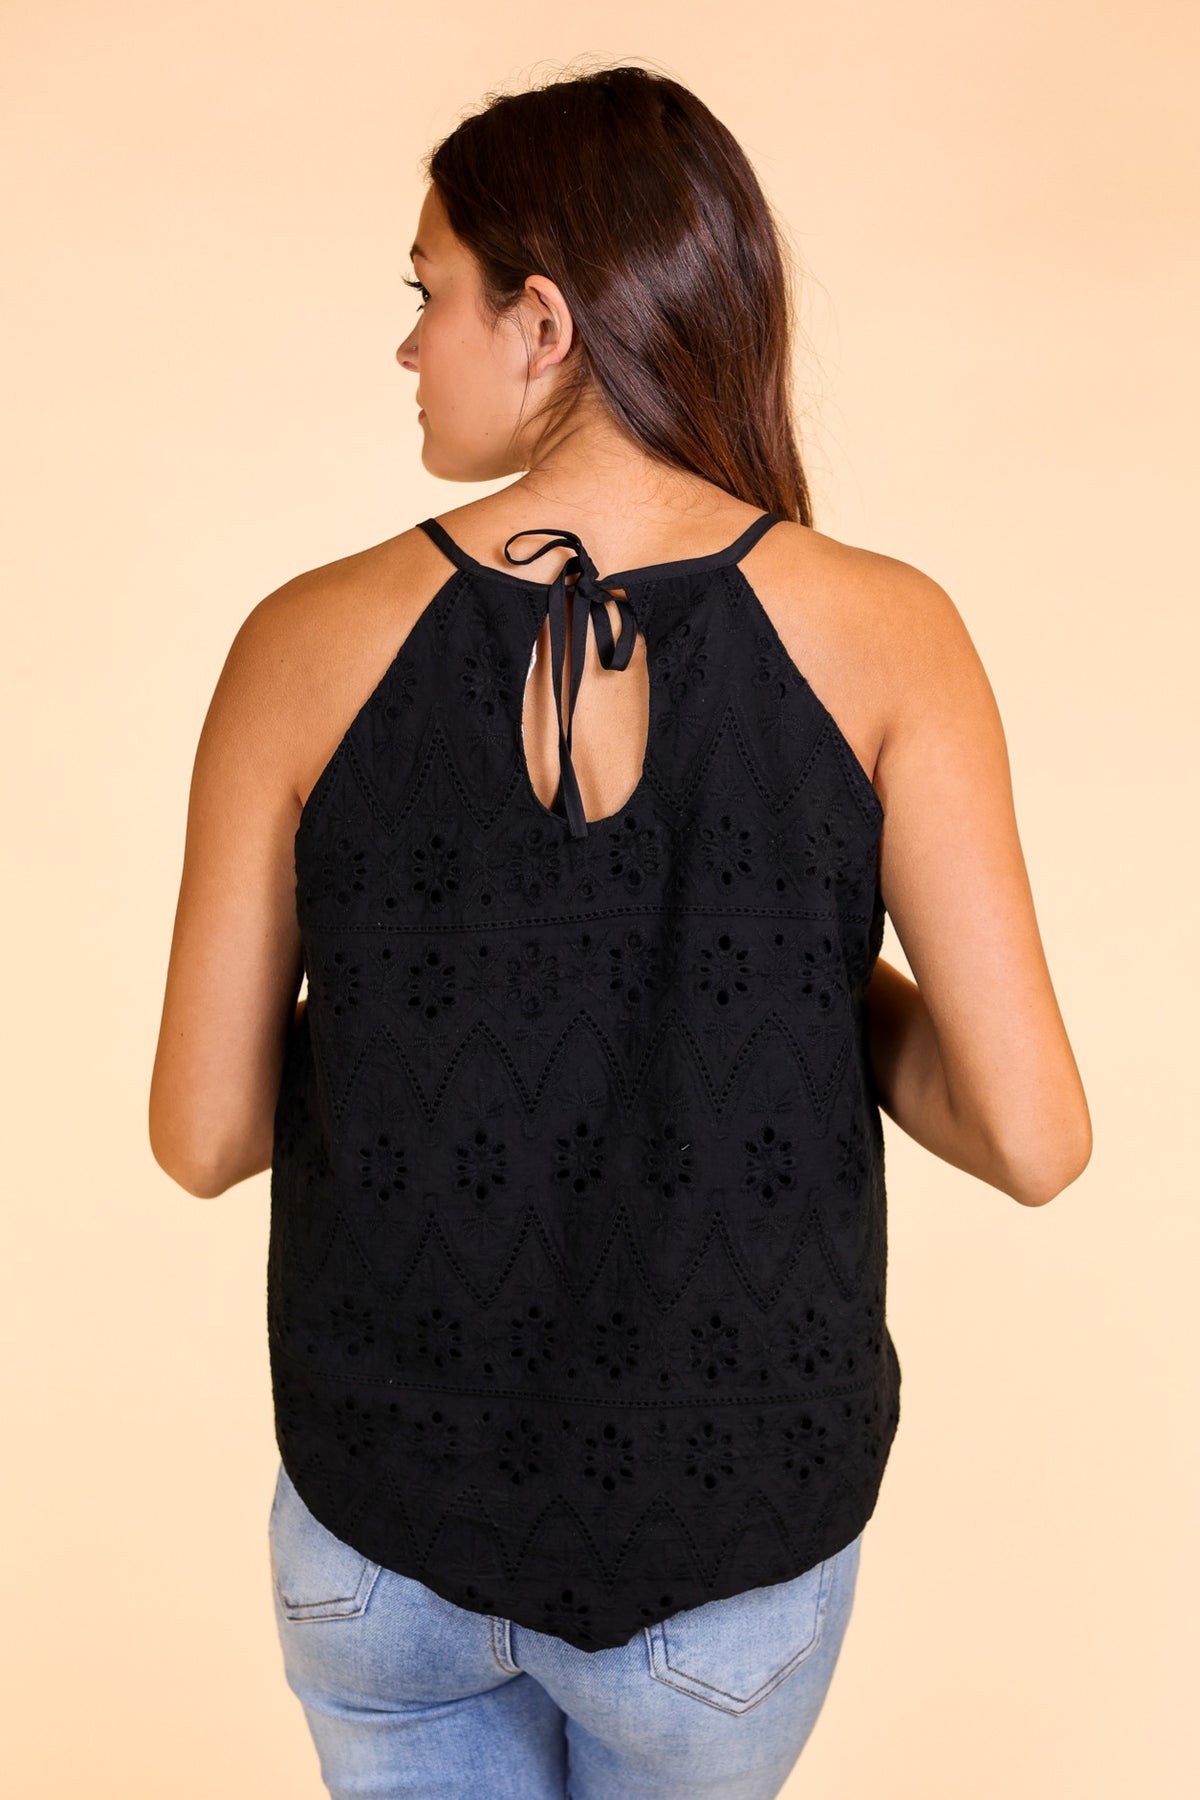 The Try and Impress Me Eyelet Top - Black